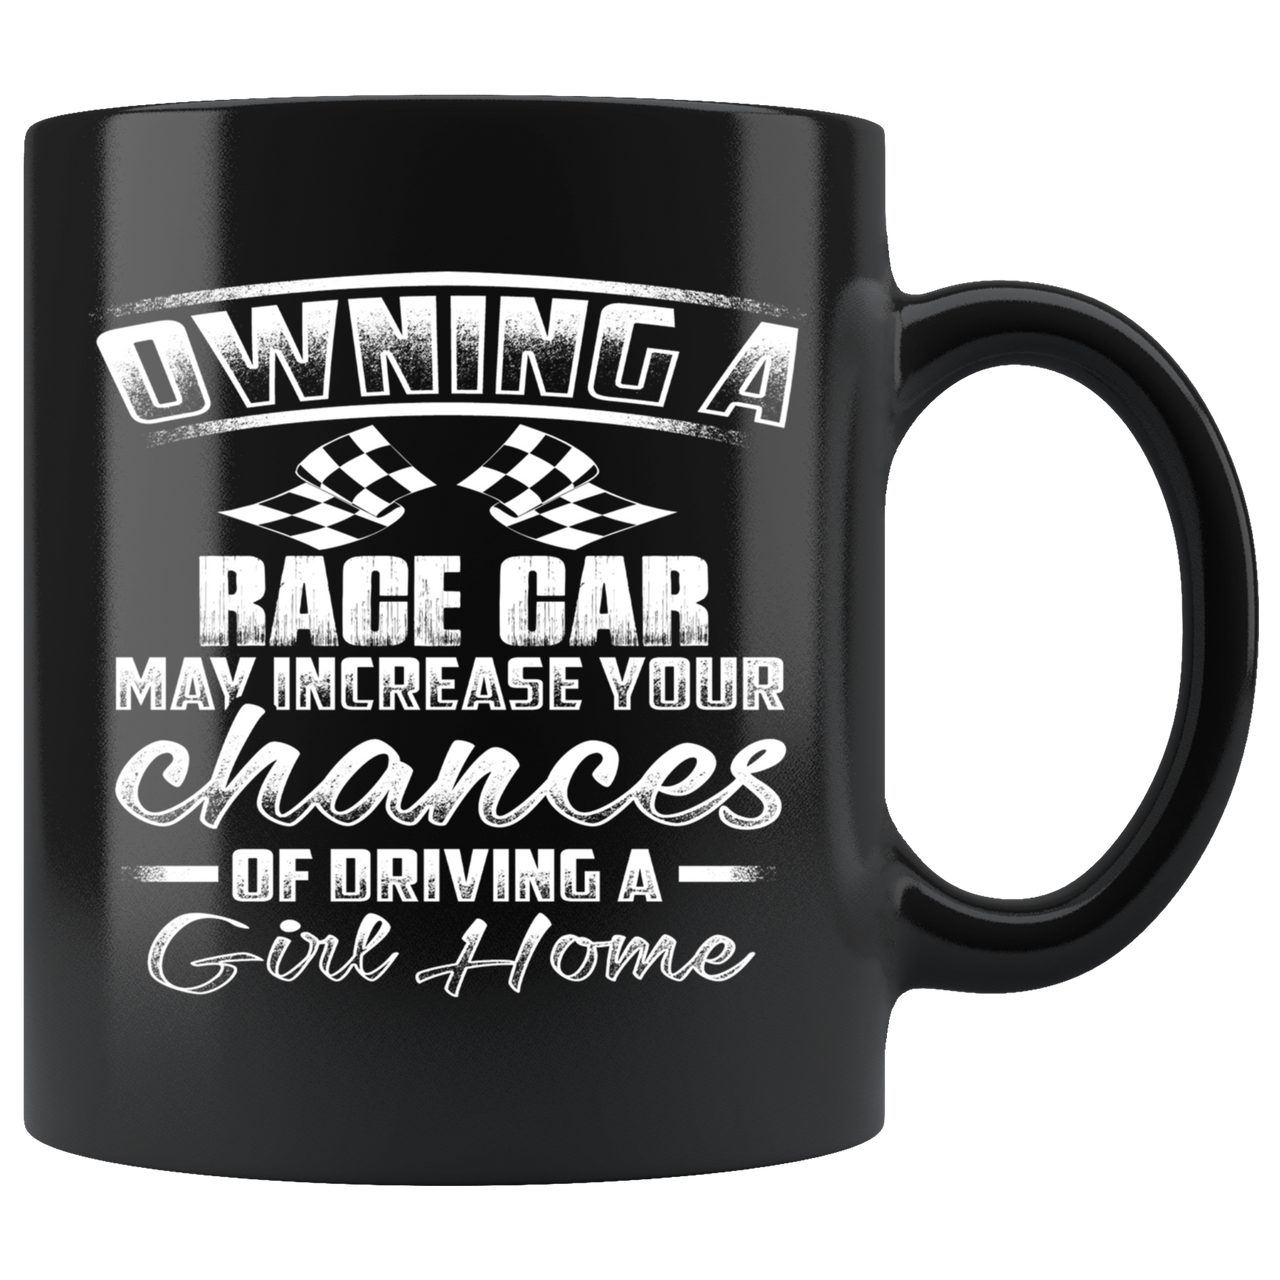 Owning A Race Car May Increase Your Chances Of Driving A Girl Home Mug!